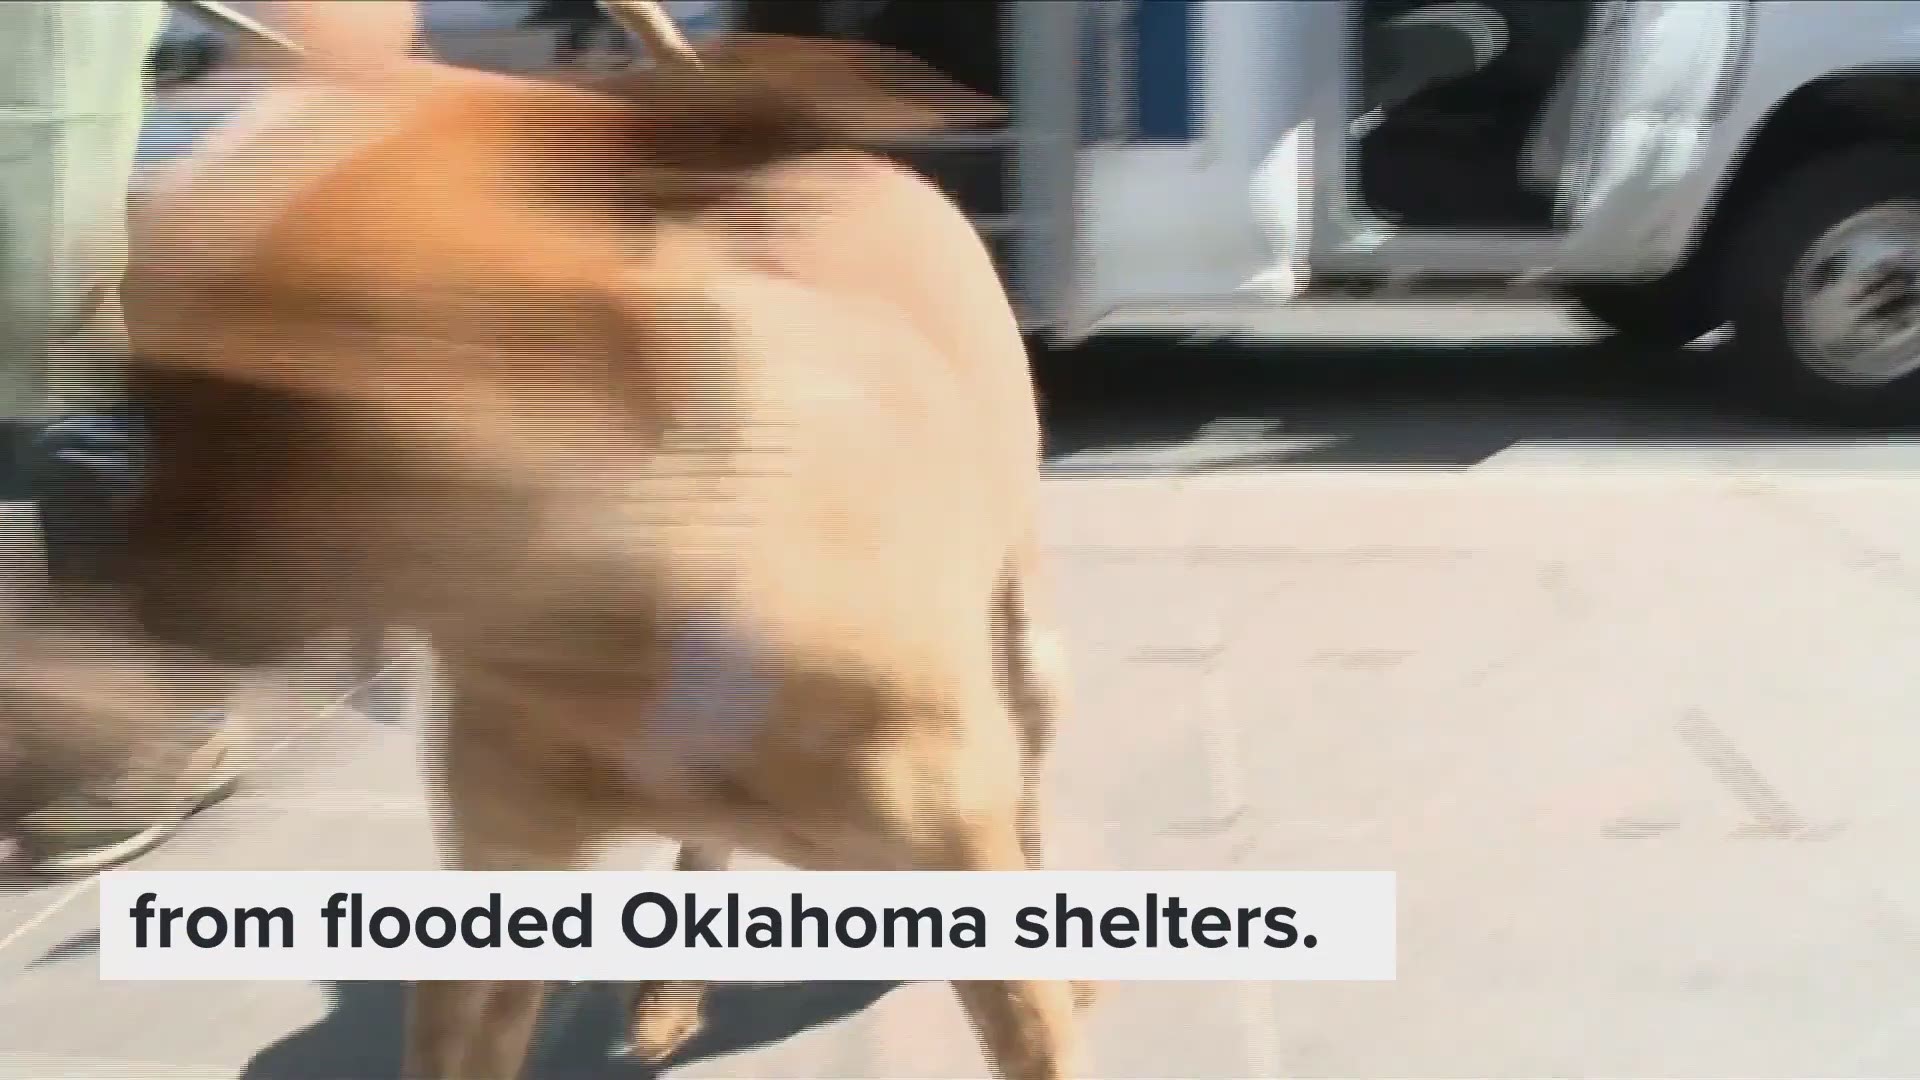 The shelter accepted around 15 animals.